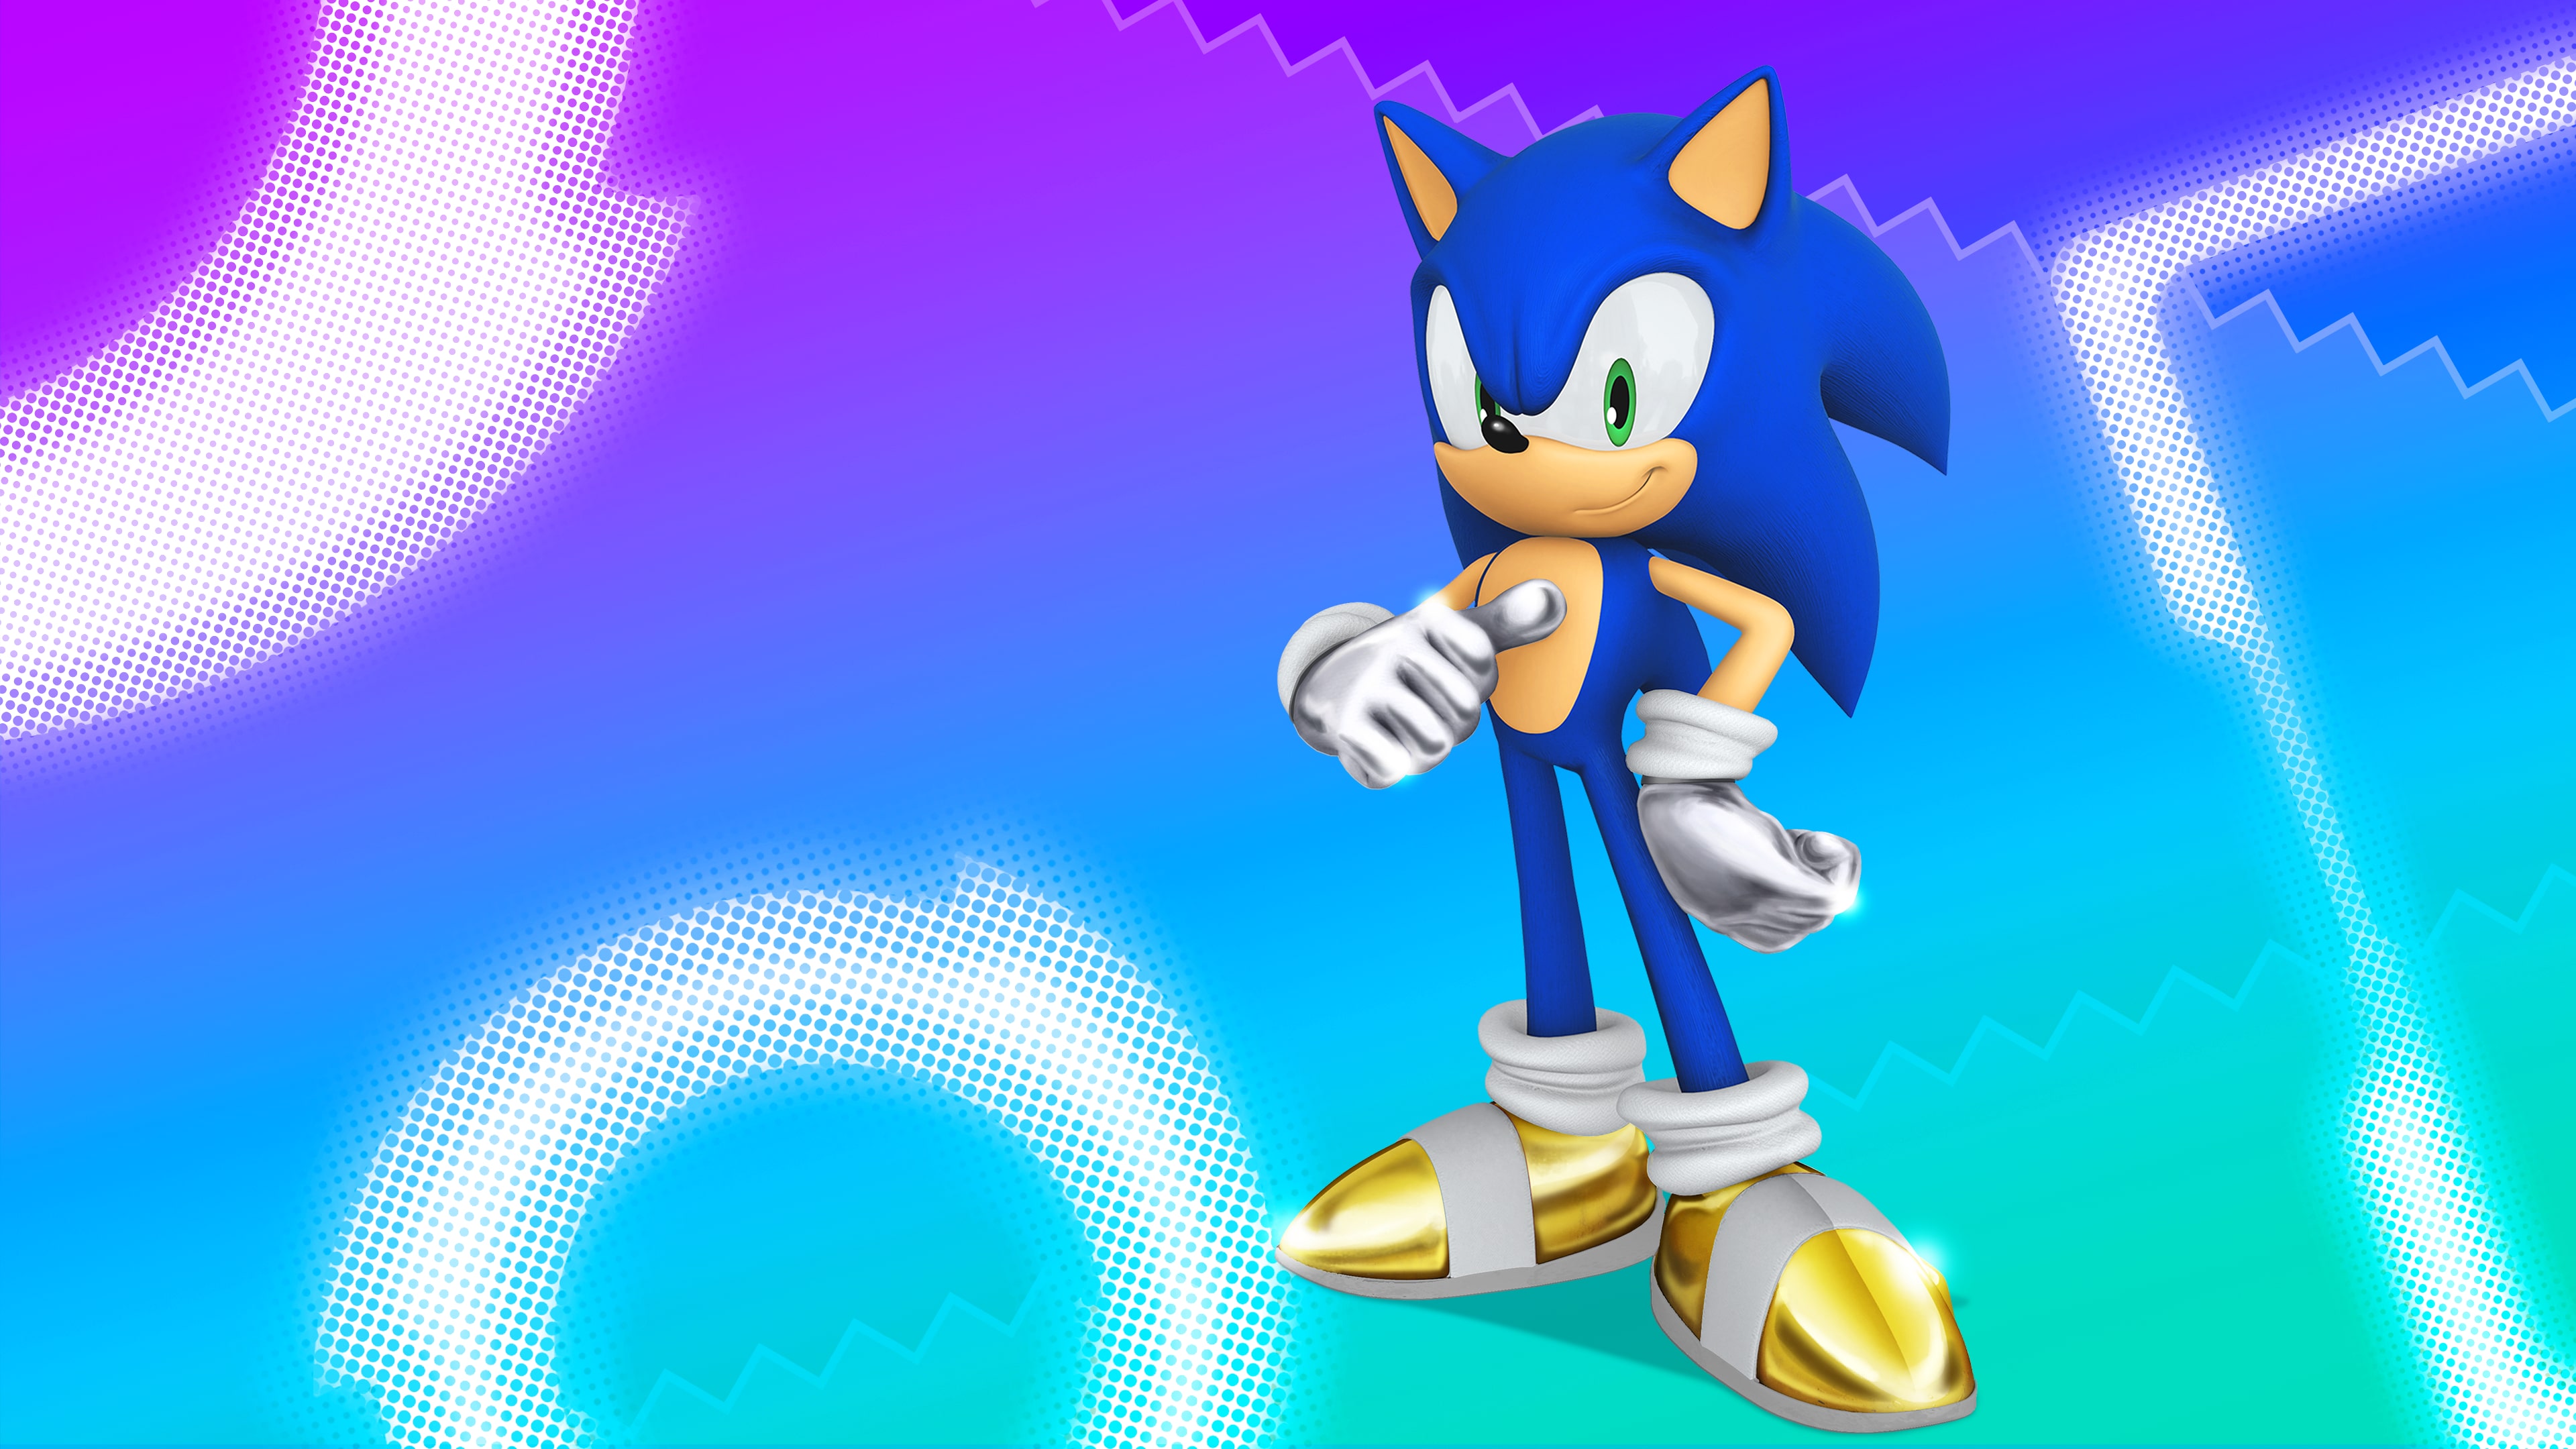 Sonic Colors: Ultimate™ - Ultimate Cosmetic Pack